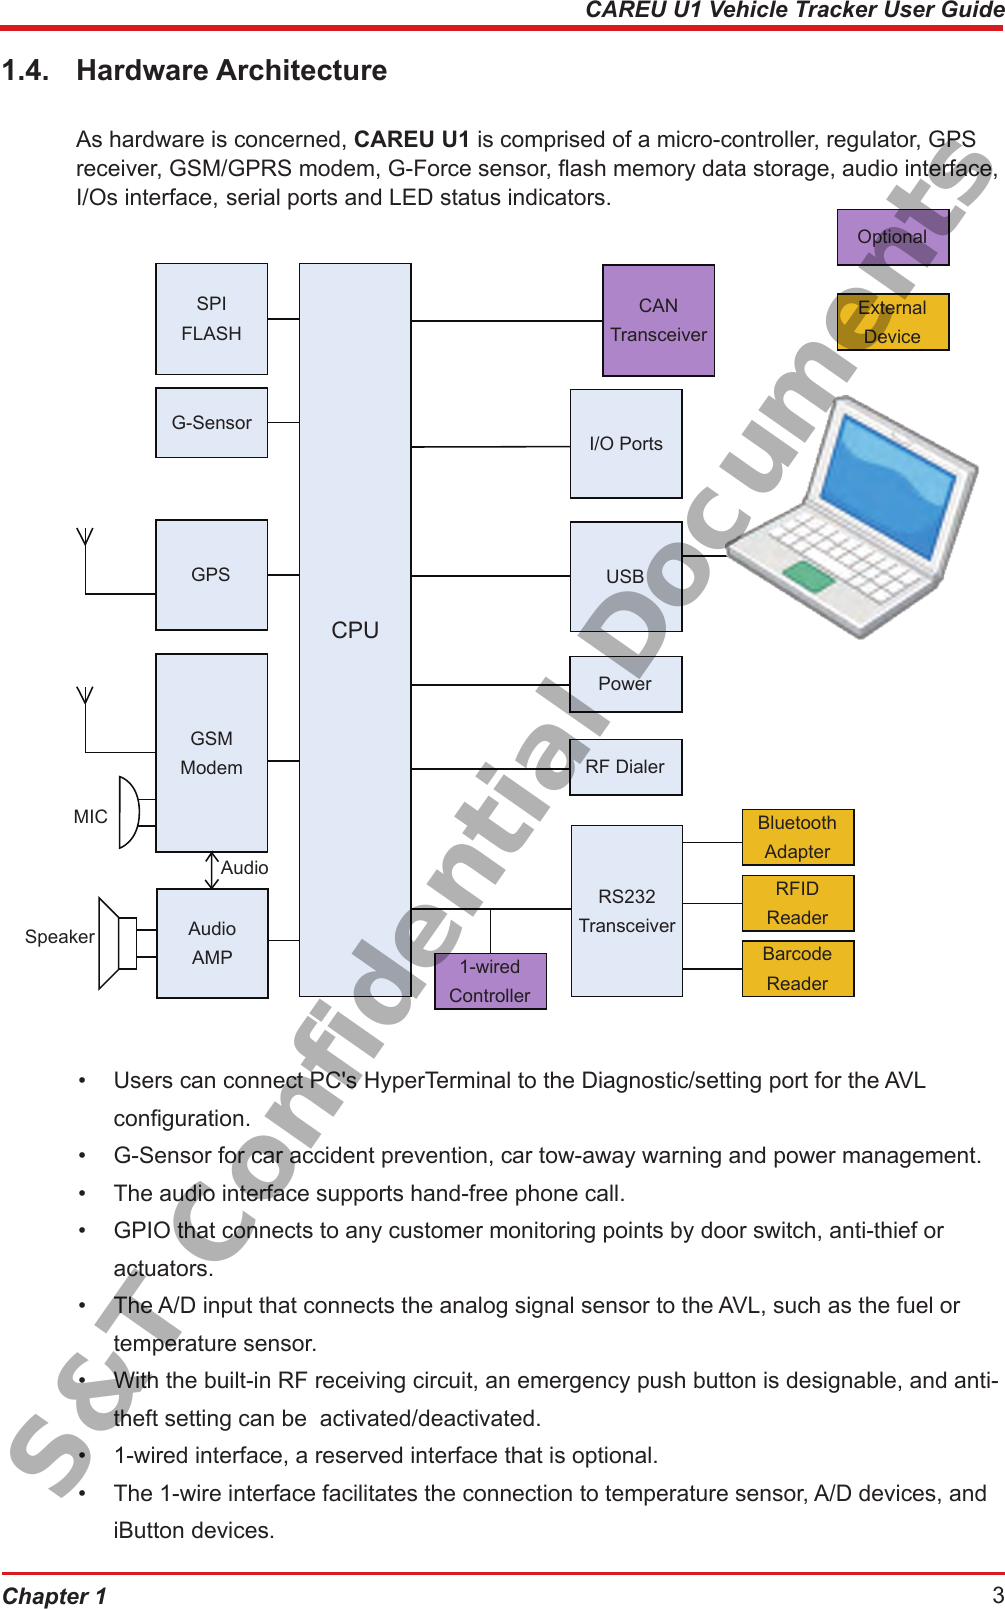 Chapter 1  3CAREU U1 Vehicle Tracker User Guide1.4.  Hardware Architecture  As hardware is concerned, CAREU U1 is comprised of a micro-controller, regulator, GPS    receiver, GSM/GPRS modem, G-Force sensor, ash memory data storage, audio interface,    I/Os interface,  serial ports and LED status indicators.•  Users can connect PC&apos;s HyperTerminal to the Diagnostic/setting port for the AVL      conguration.•  G-Sensor for car accident prevention, car tow-away warning and power management.•  The audio interface supports hand-free phone call.•  GPIO that connects to any customer monitoring points by door switch, anti-thief or      actuators.•  The A/D input that connects the analog signal sensor to the AVL, such as the fuel or      temperature sensor.•  With the built-in RF receiving circuit, an emergency push button is designable, and anti-   theft setting can be  activated/deactivated.•  1-wired interface, a reserved interface that is optional.•  The 1-wire interface facilitates the connection to temperature sensor, A/D devices, and    iButton devices.SPI FLASHCAN TransceiverG-SensorI/O PortsGPS USBPowerBluetoothAdapterOptional1-wired ControllerRFID ReaderExternal DeviceBarcode ReaderRF DialerGSM ModemAudio AMPRS232 TransceiverCPUAudioMICSpeakerS&amp;T Confidential Documents